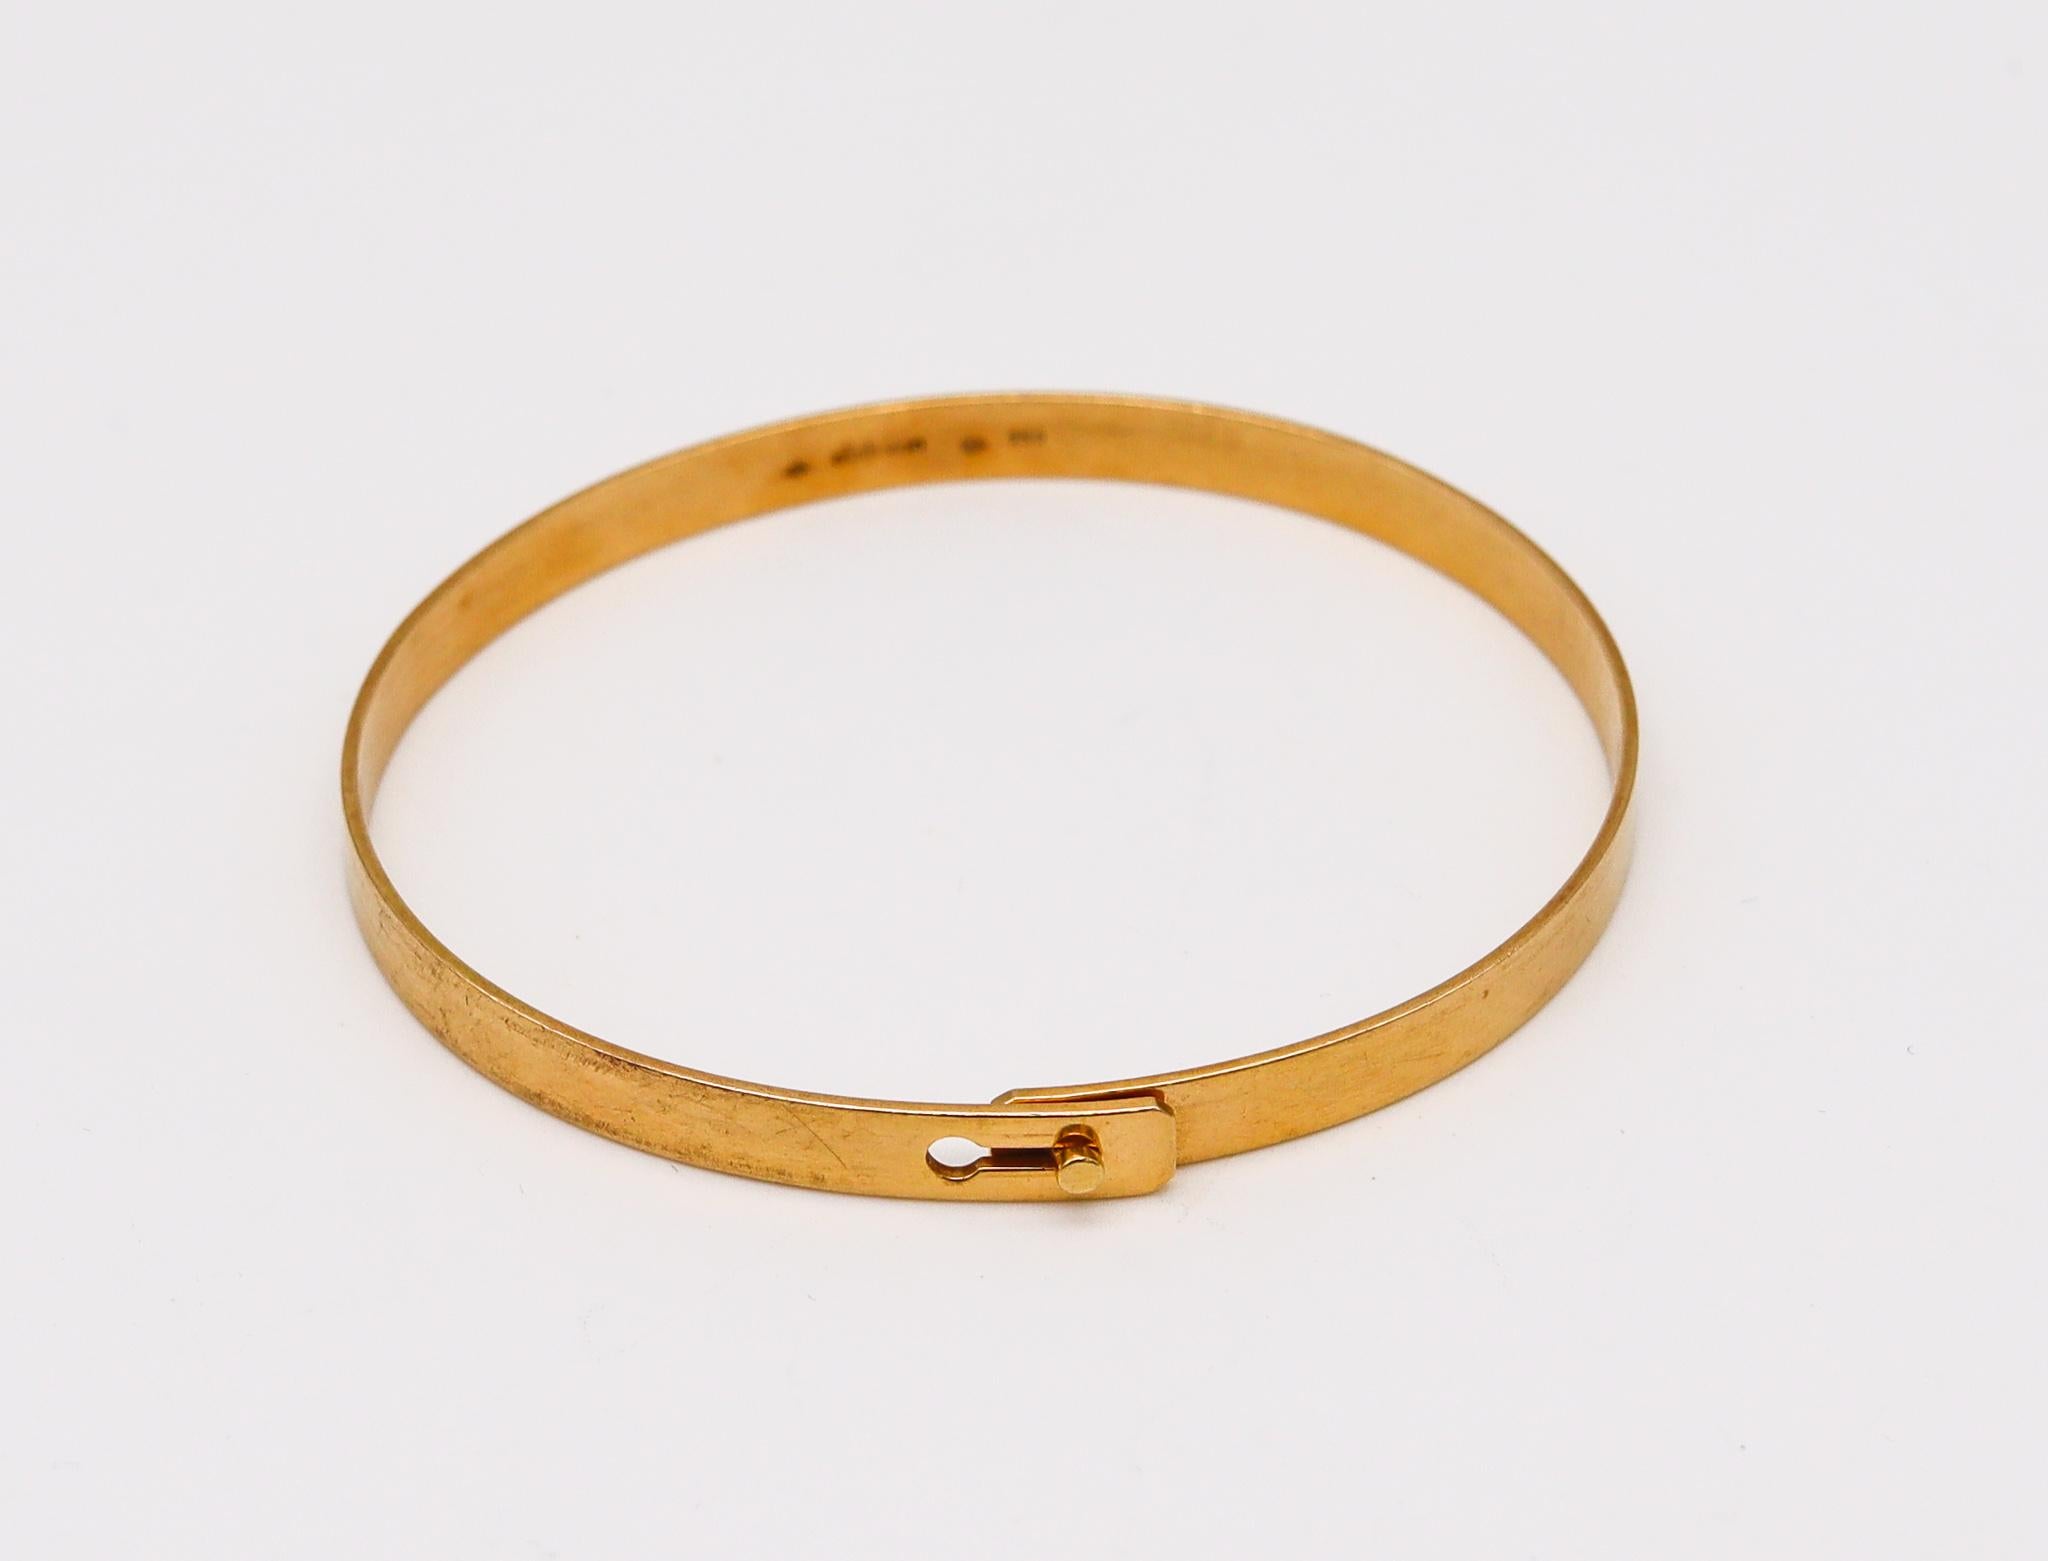 A geometric serrure bracelet designed by Jean Dinh Van.

Beautiful vintage bracelet, created in Paris France in the 1980 at the jewelry atelier of the iconic designer Dinh Van. This geometric avant garde bangle is from the popular collection named